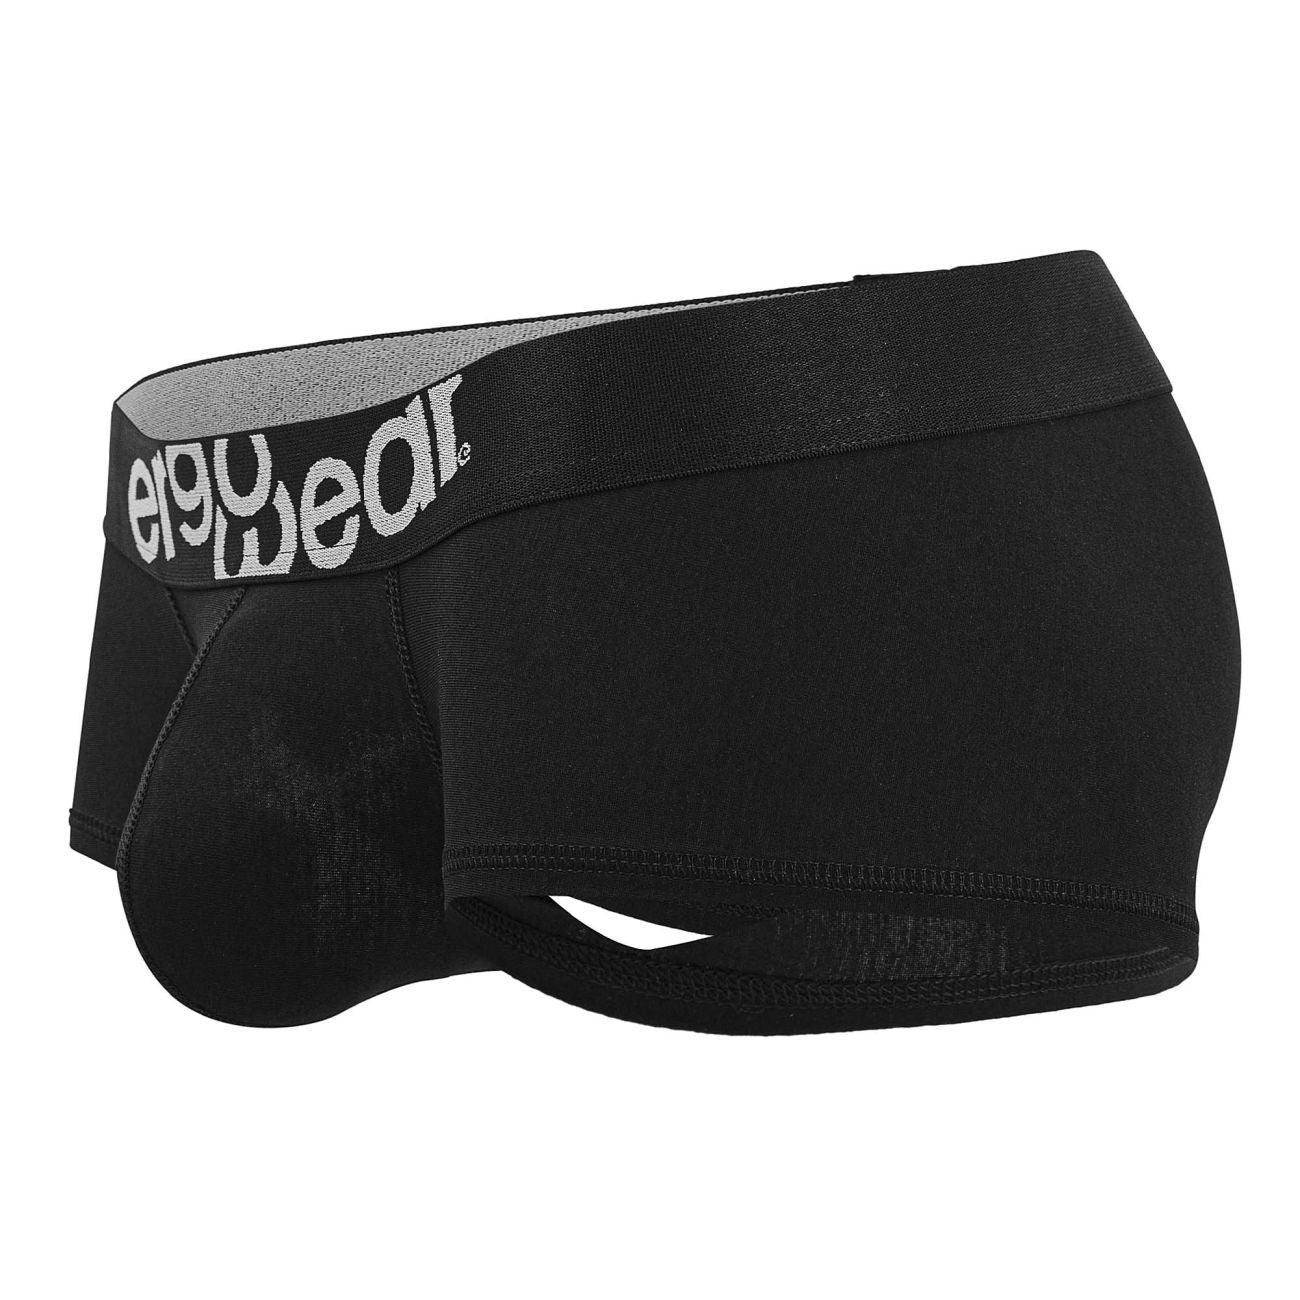 image of product,MAX COTTON Trunks - SEXYEONE